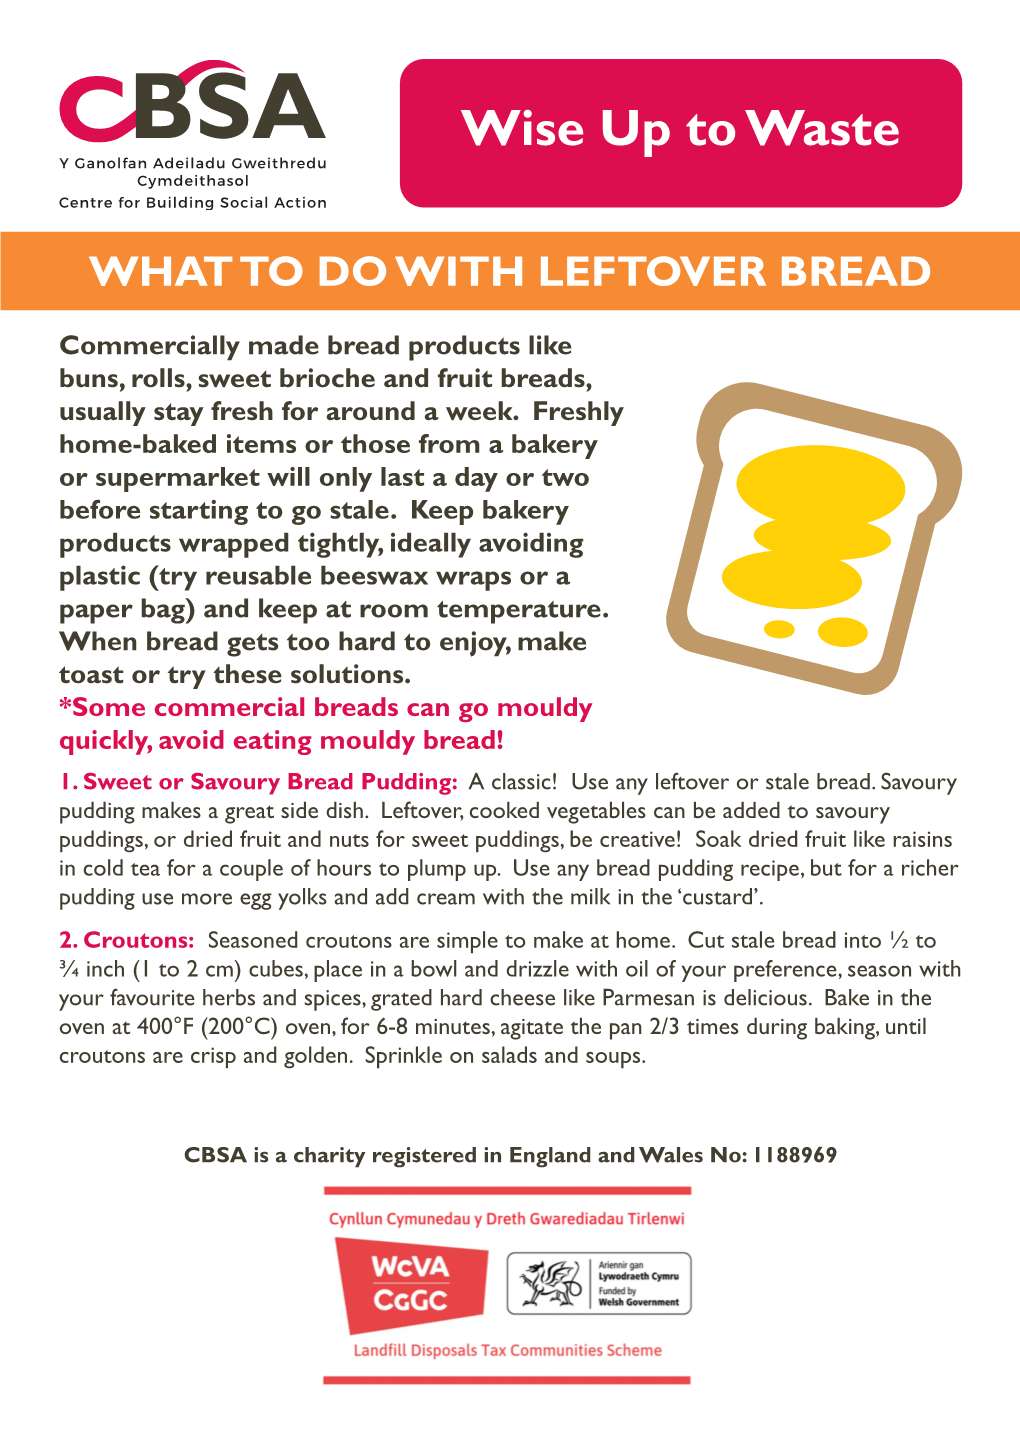 What to Do with Leftover Bread